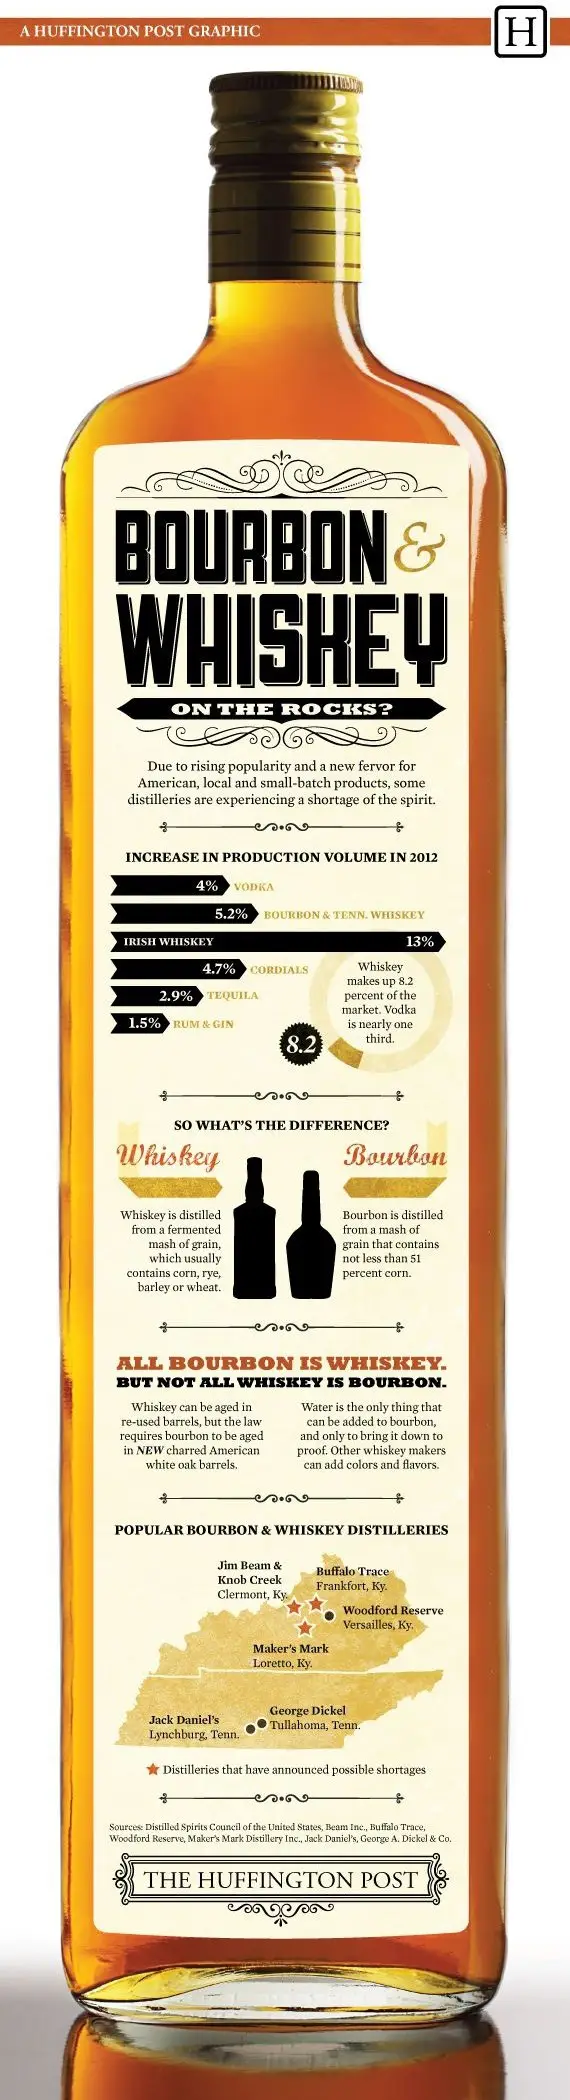 What You Might Not Have Known about Whiskey